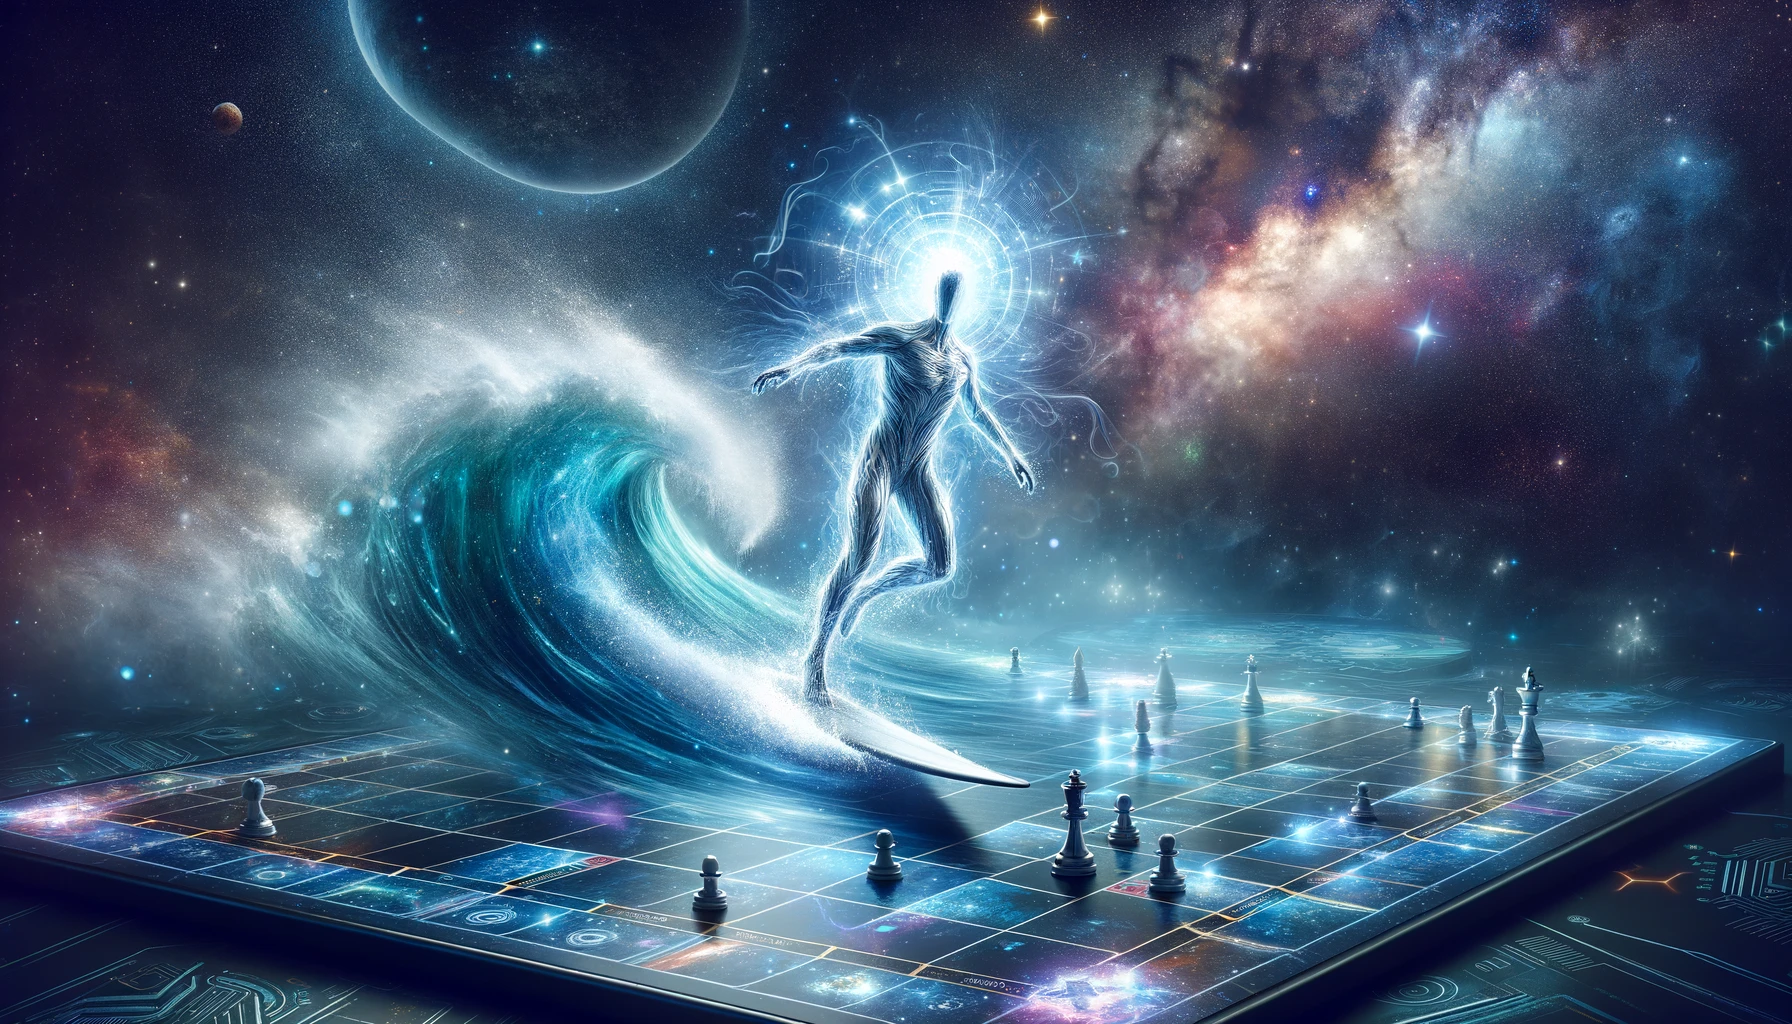 A human silhouette on a board, moving on a cosmic wave, against a background of outer space, with a chessboard and pieces in the foreground.